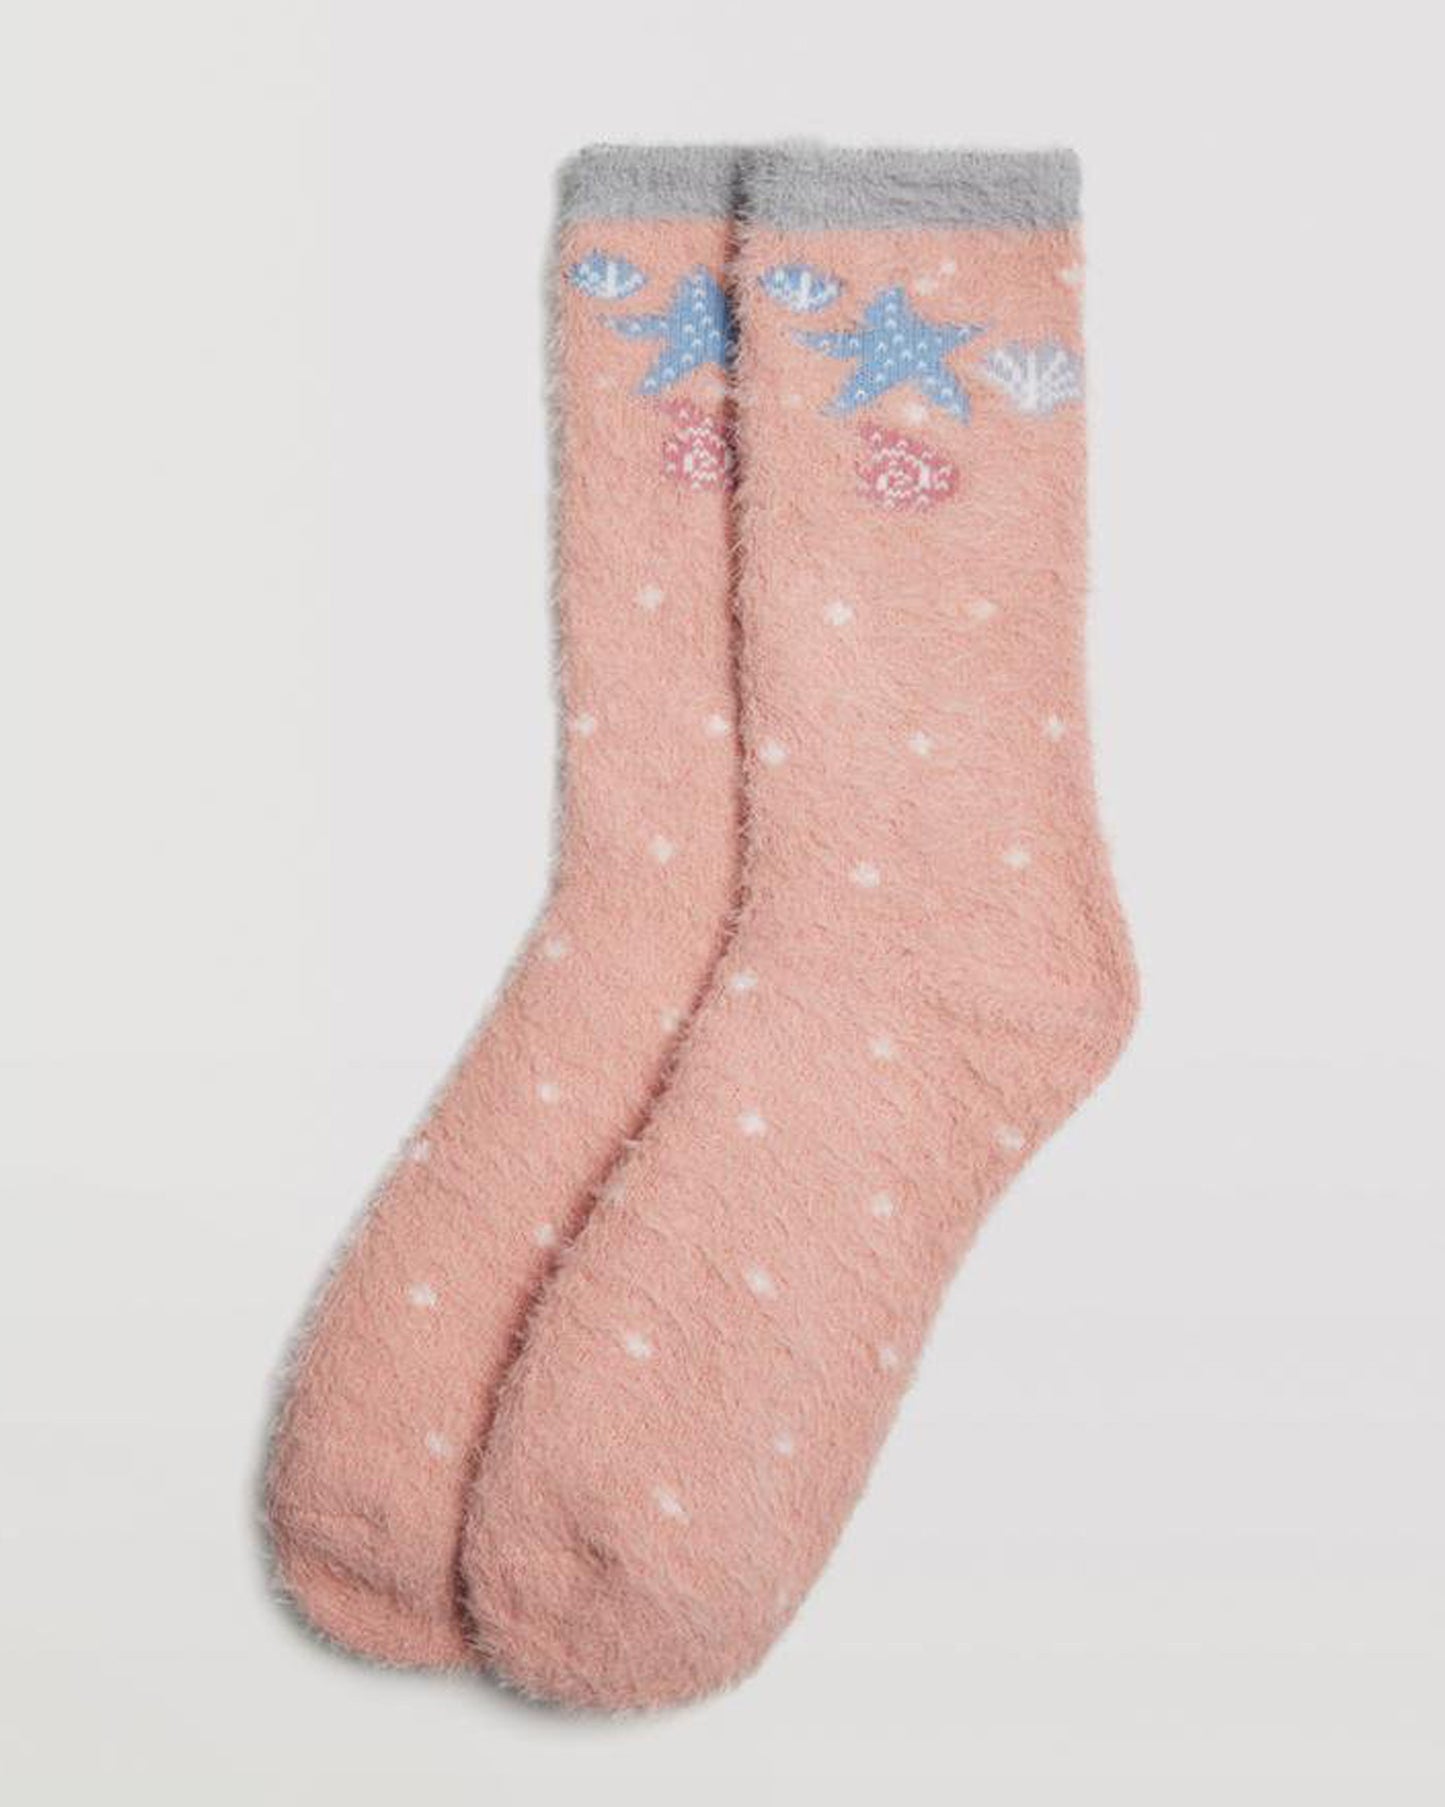 Ysabel Mora 12895 Shellfish Fluffy Socks - Warm and fluffy peach coloured house socks with shellfish around the ankle, small spot pattern in cream and light peach anti-pressure cuff.